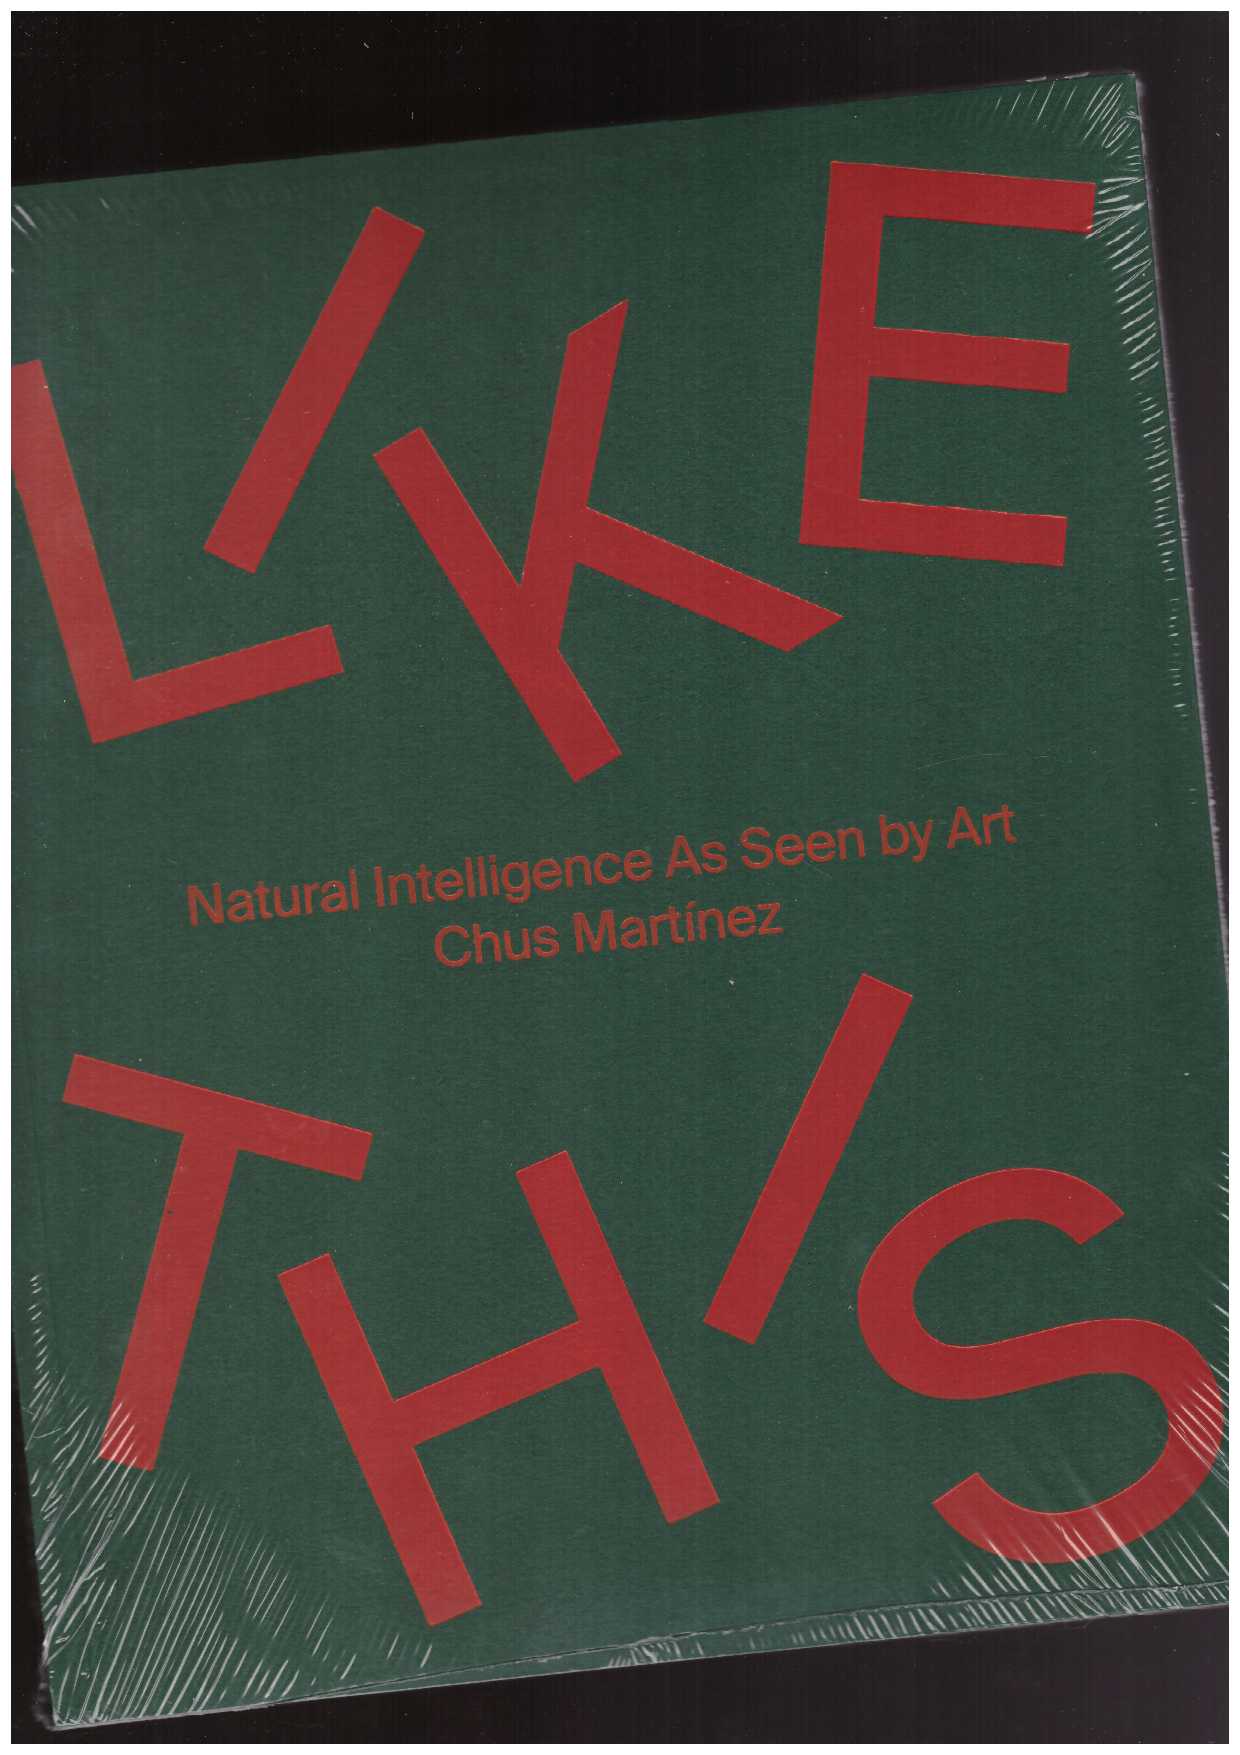 MARTINEZ, Chus (ed) - Like This. Natural Intelligence as Seen by Art